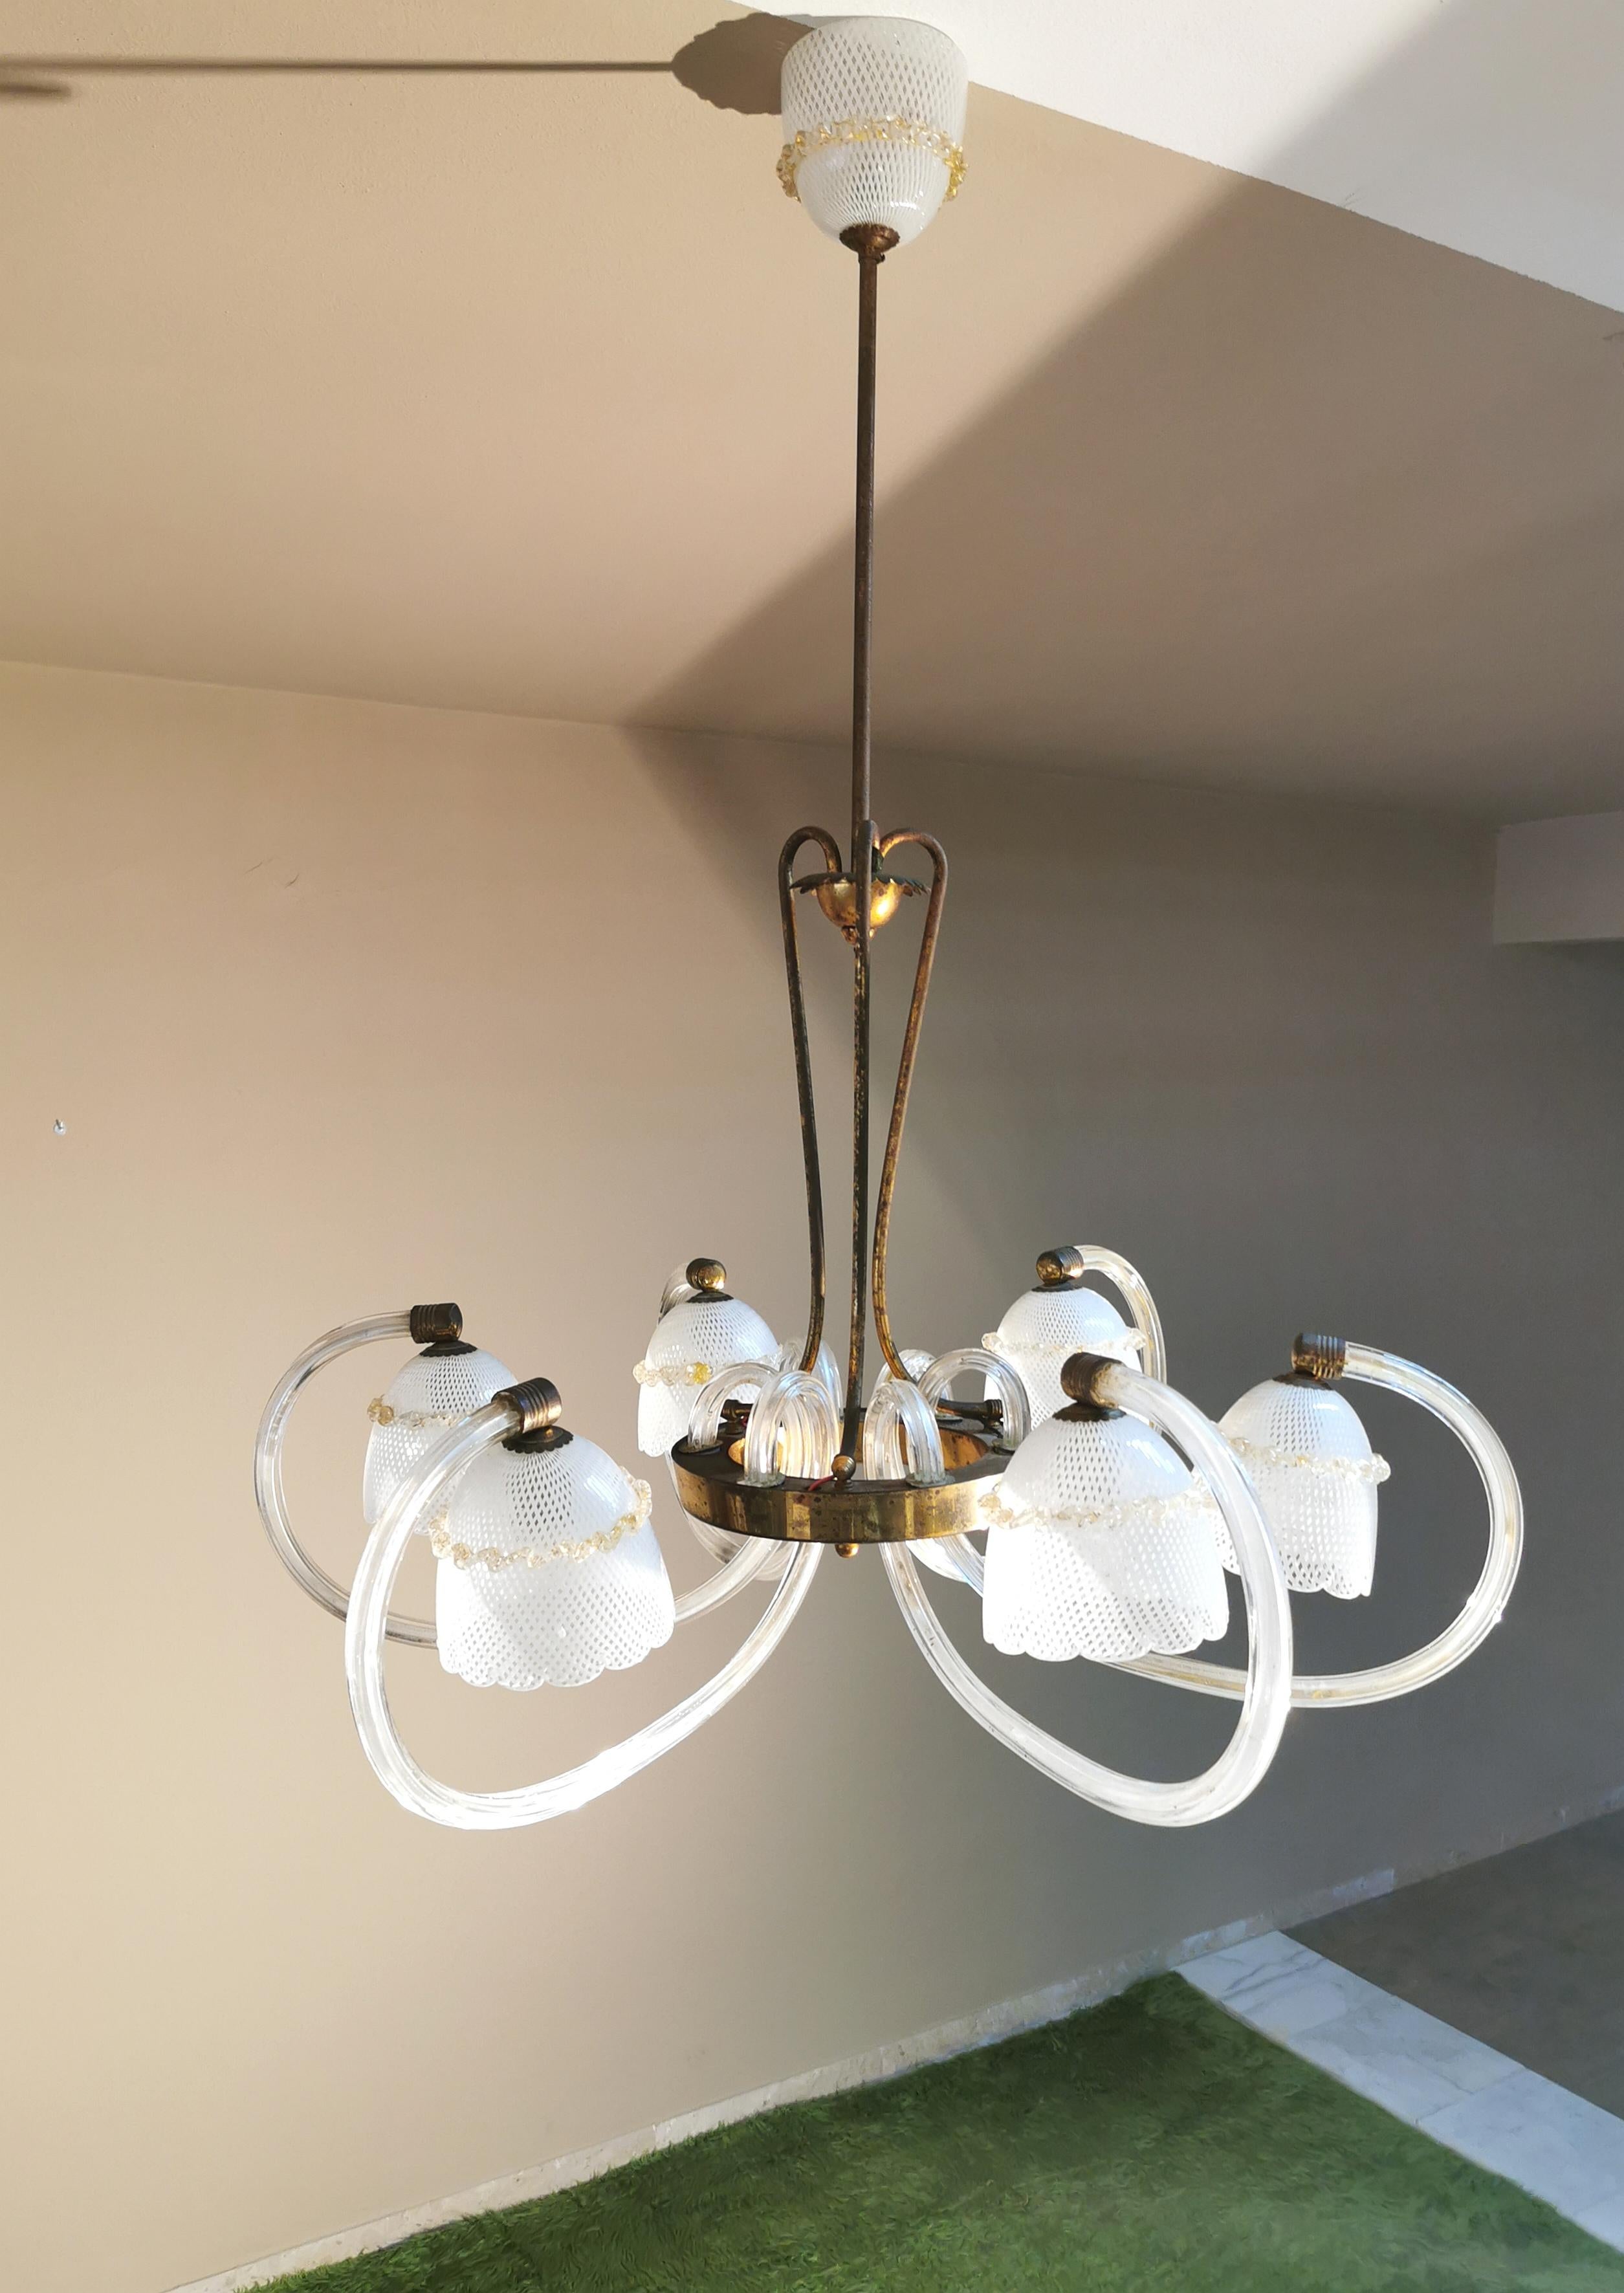 Elegant and refined 6-light chandelier designed by the famous Venetian company Barovier & Toso between the 1930s and 1940s. The chandelier has 6 arms with curved glass housing and Reticello Murano glass diffuser with golden scalloped cord, supported